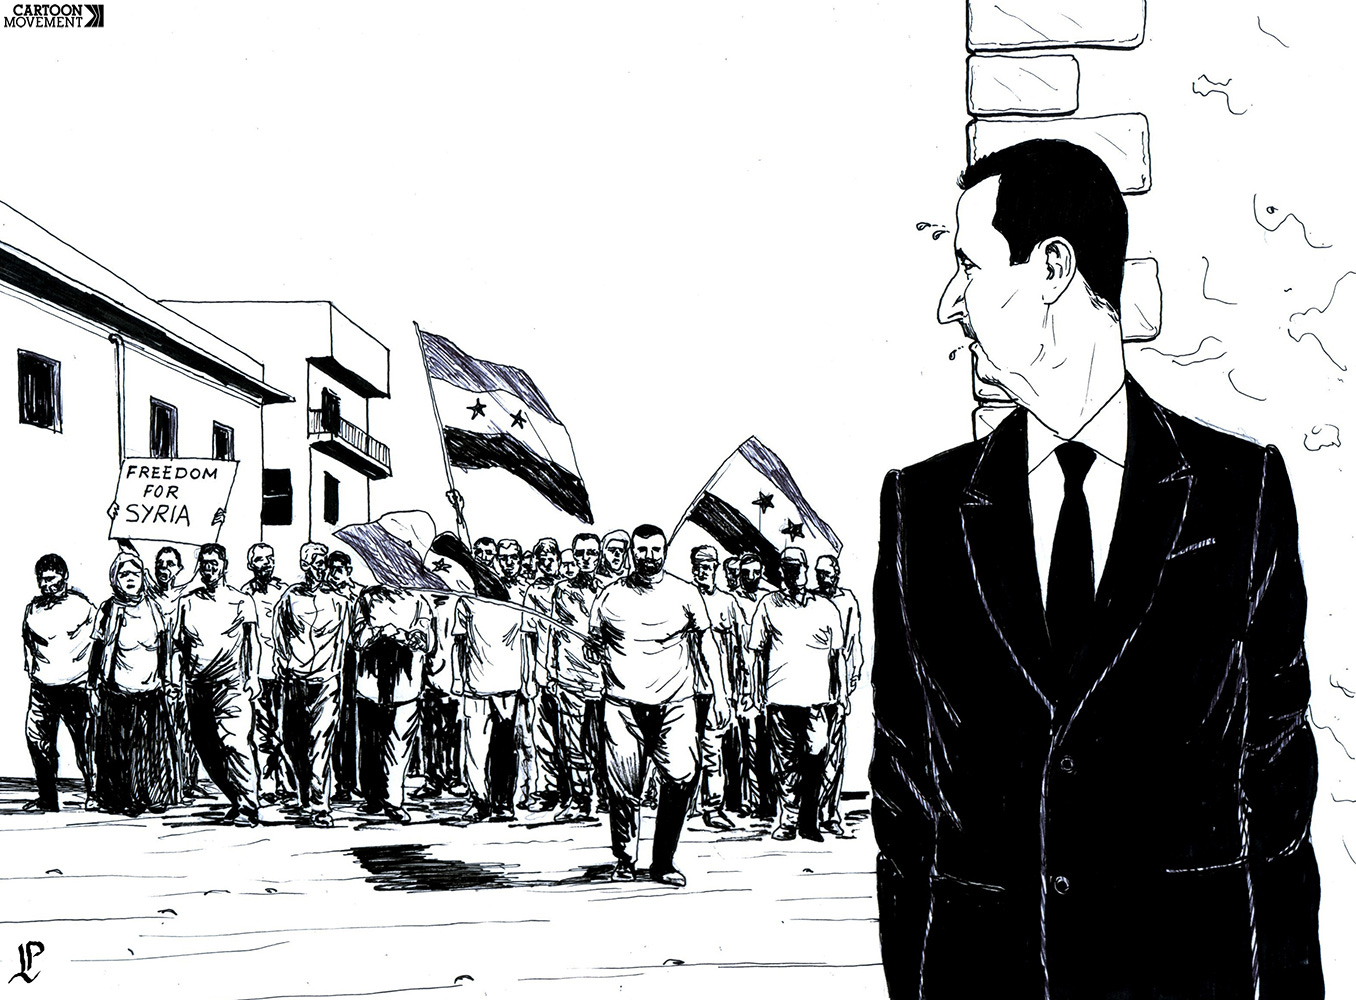 Cartoon showing Syrian president Assad scared, sweating and hiding around a corner while protesters march in the street.